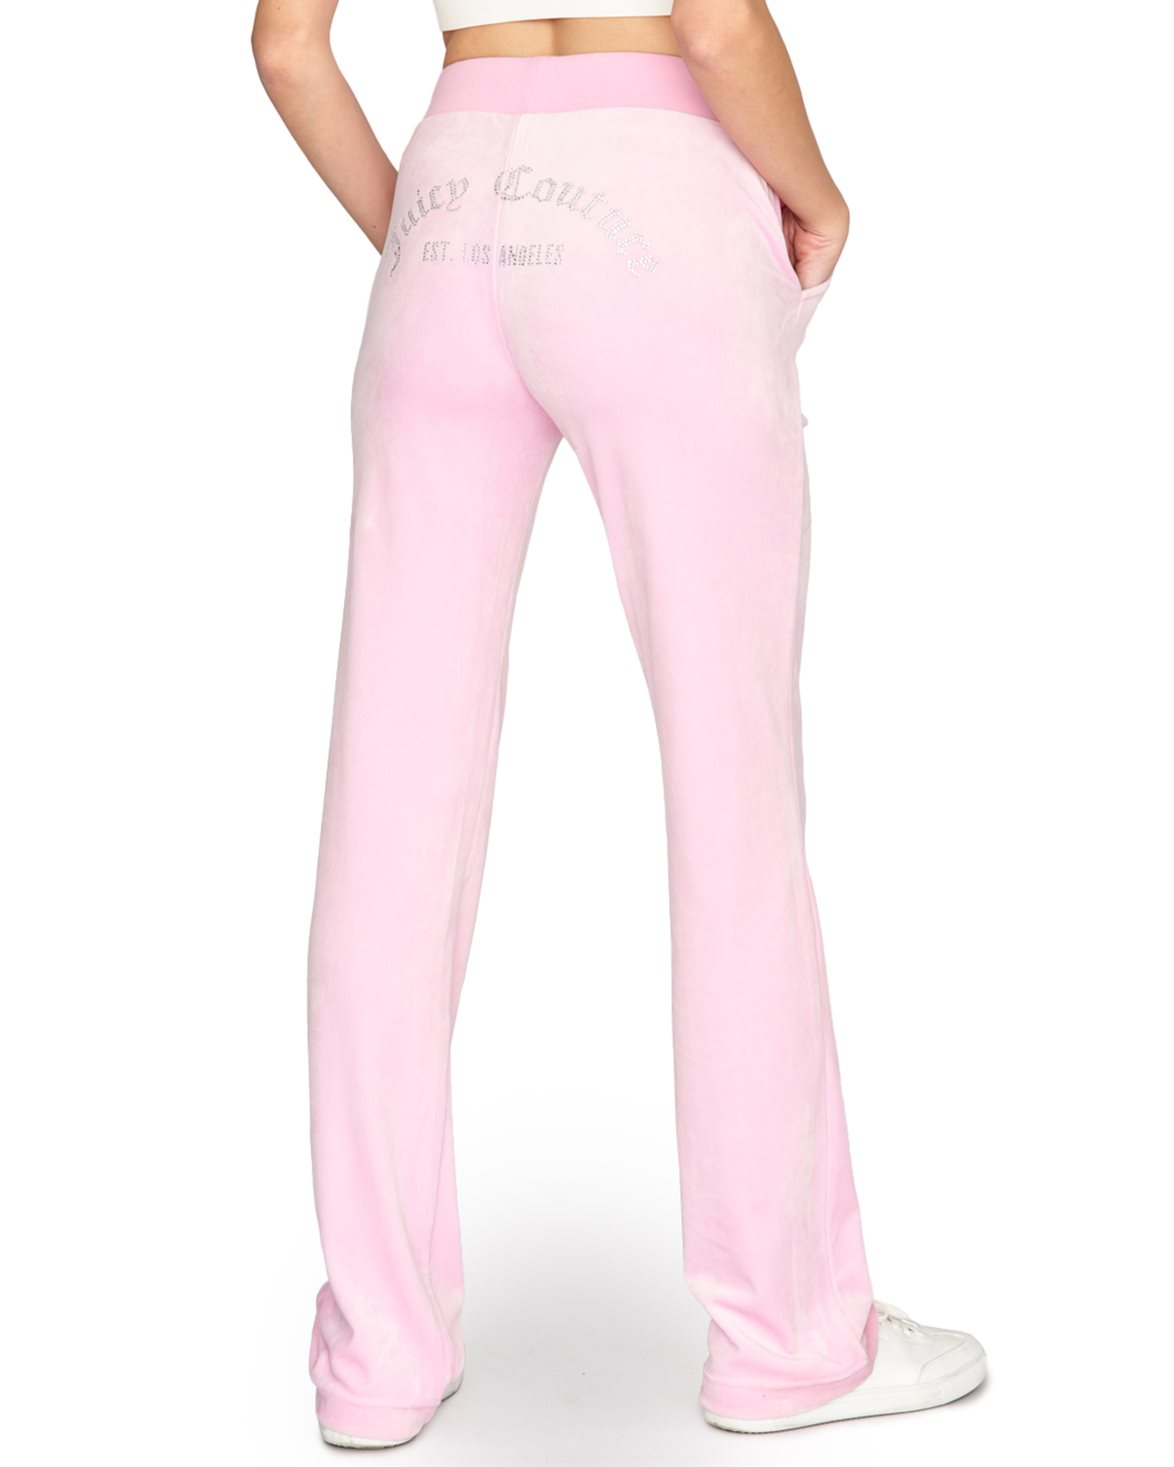 Juicy Couture Classic Velour Del Ray Pant Nantucket Breeze